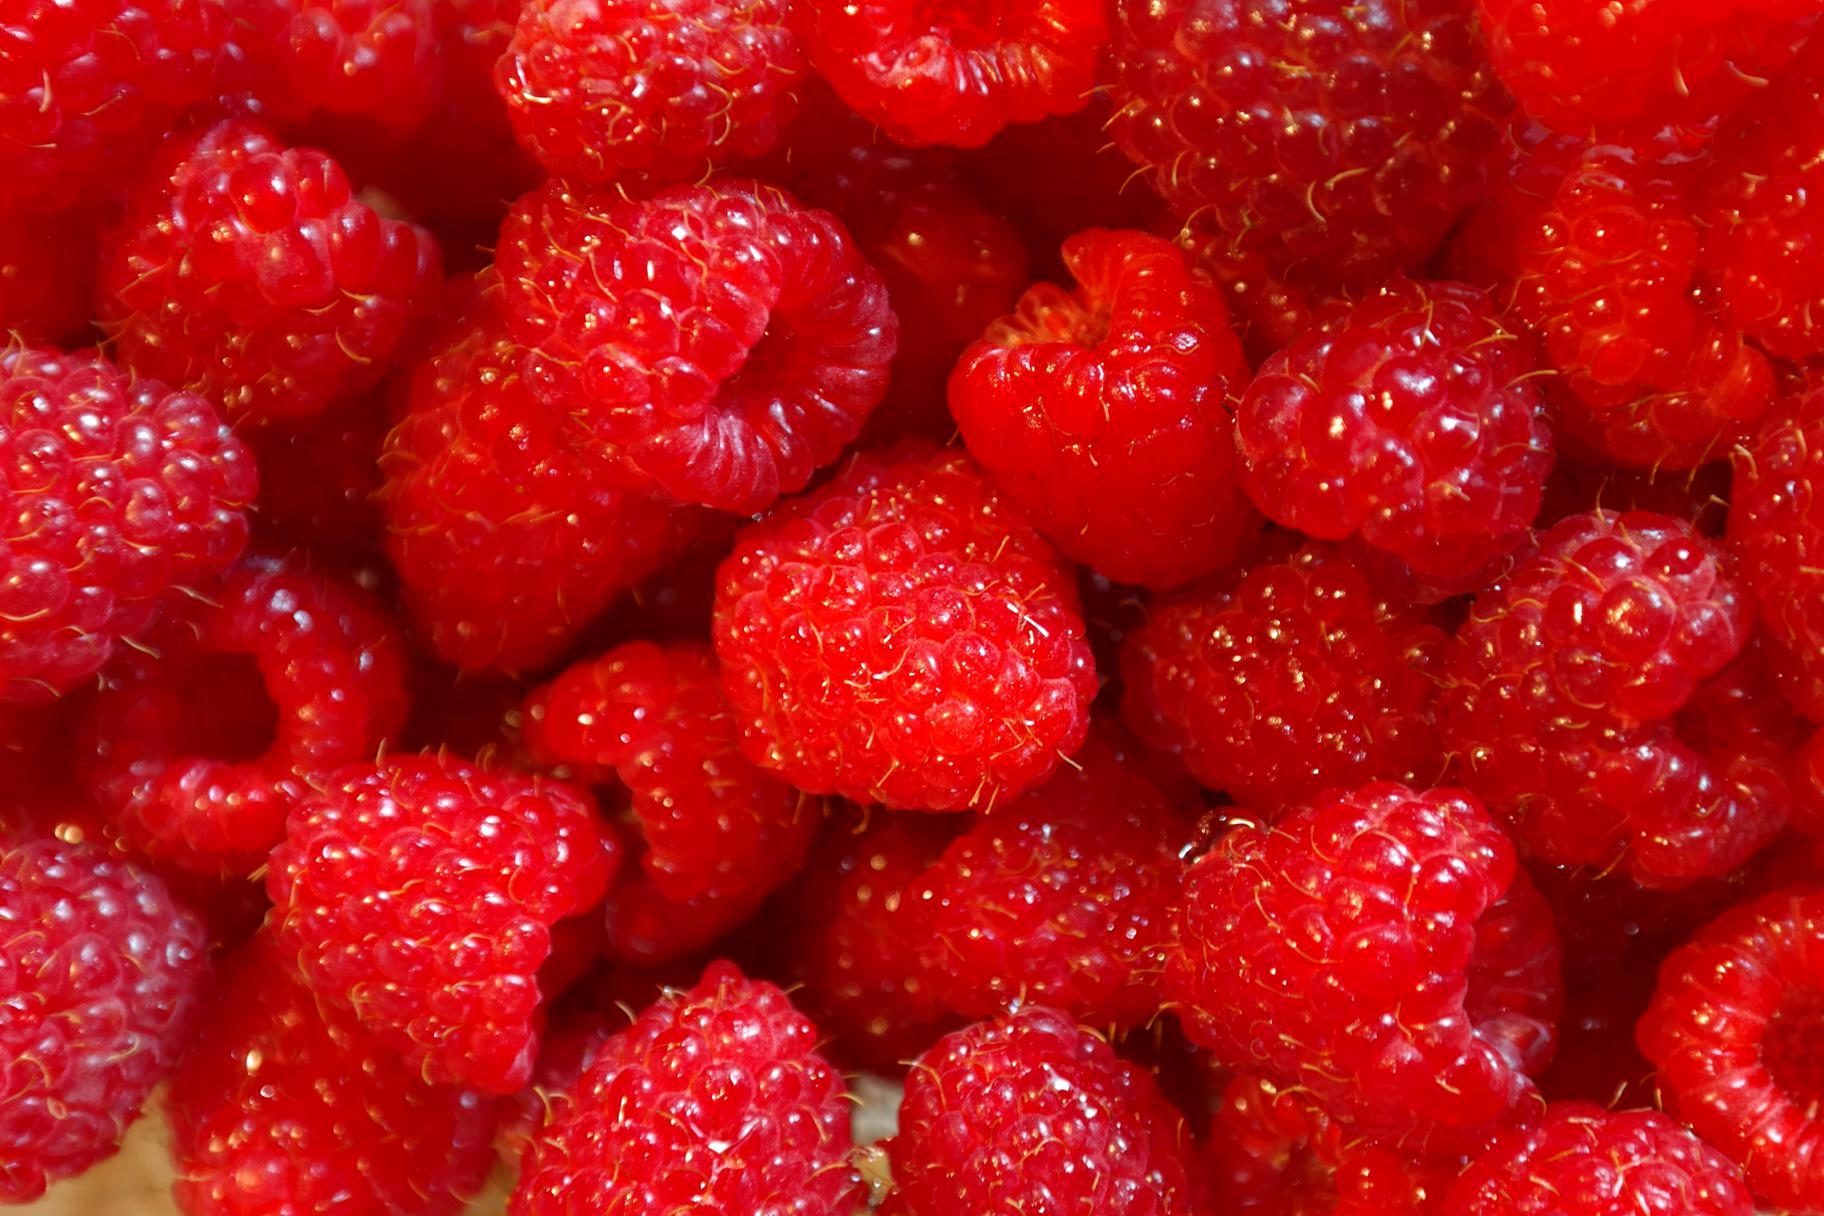 Free picture: raspberries, fruits, food, healthy, red fruits, fresh ...